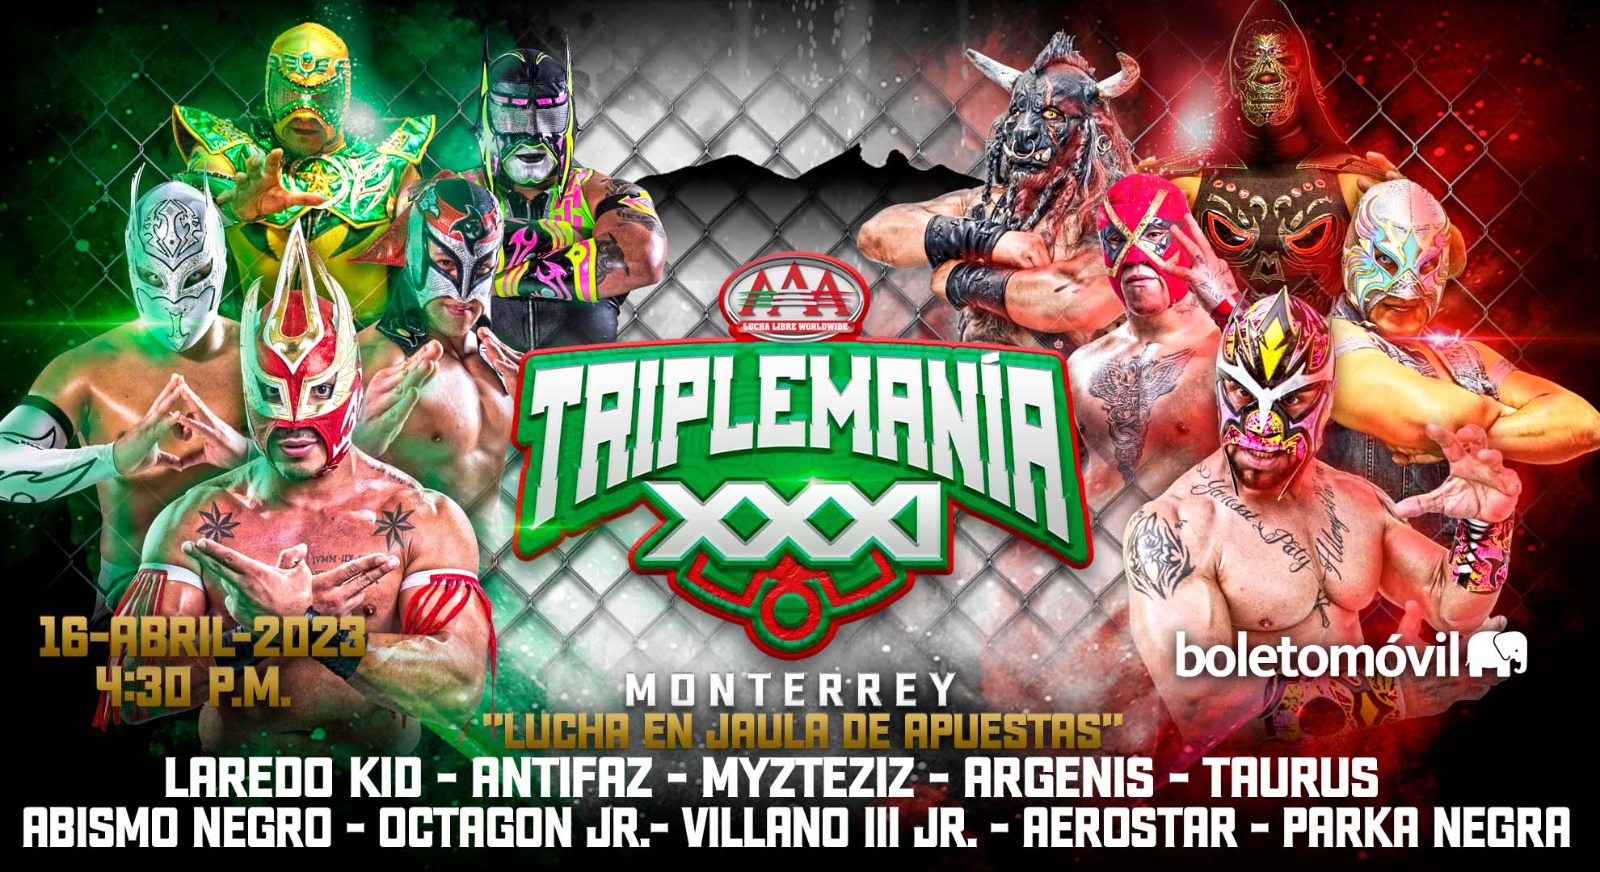 10-man Steel Cage match withe the two winners facing in a Lucha de Apuestas mask vs mask match